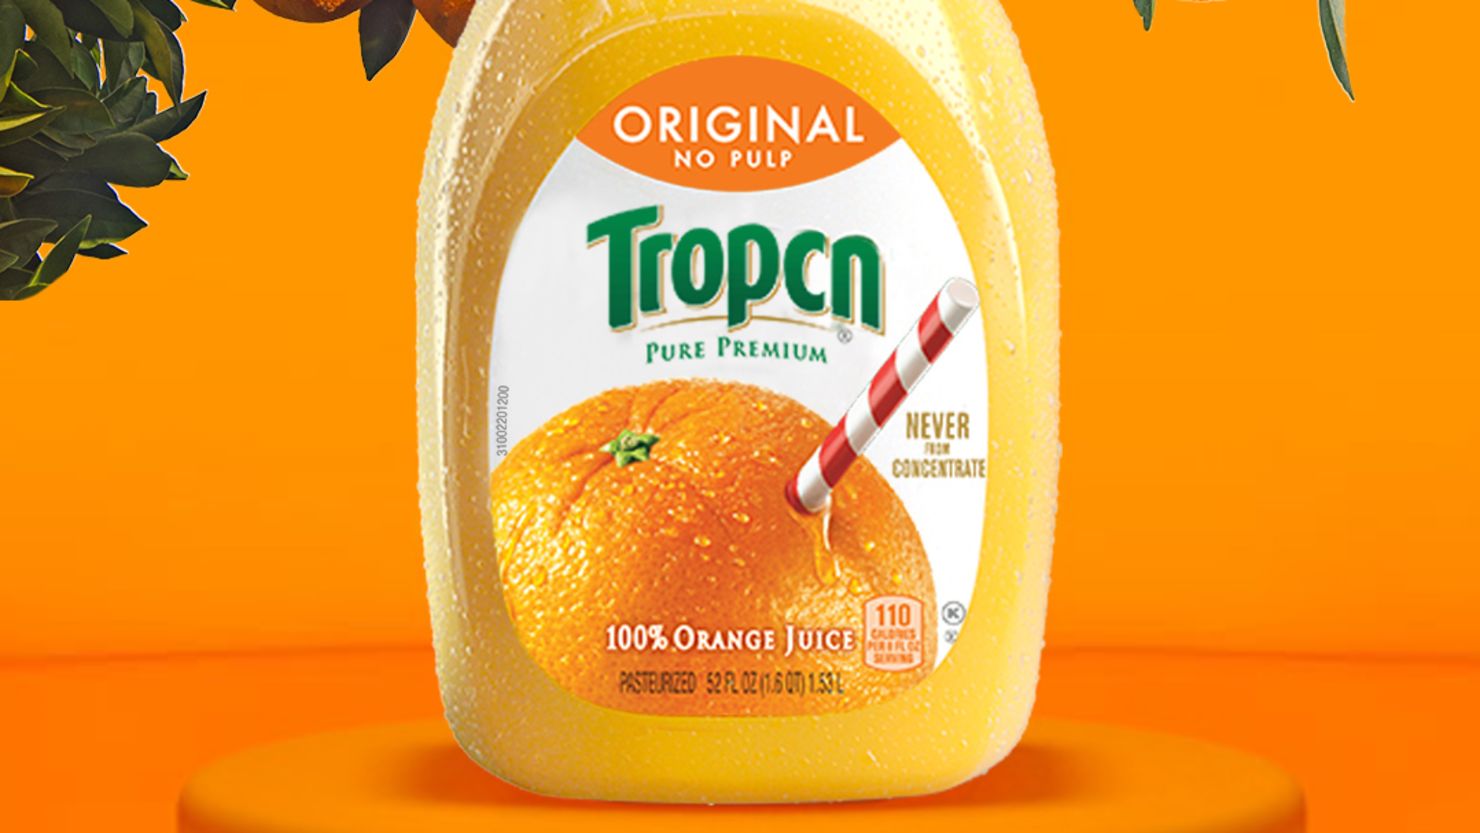 Tropicana introduces “Tropcn,” a new limited-edition packaging — now with the letters “AI” removed from their name — to celebrate the orange juice brand’s natural ingredients.